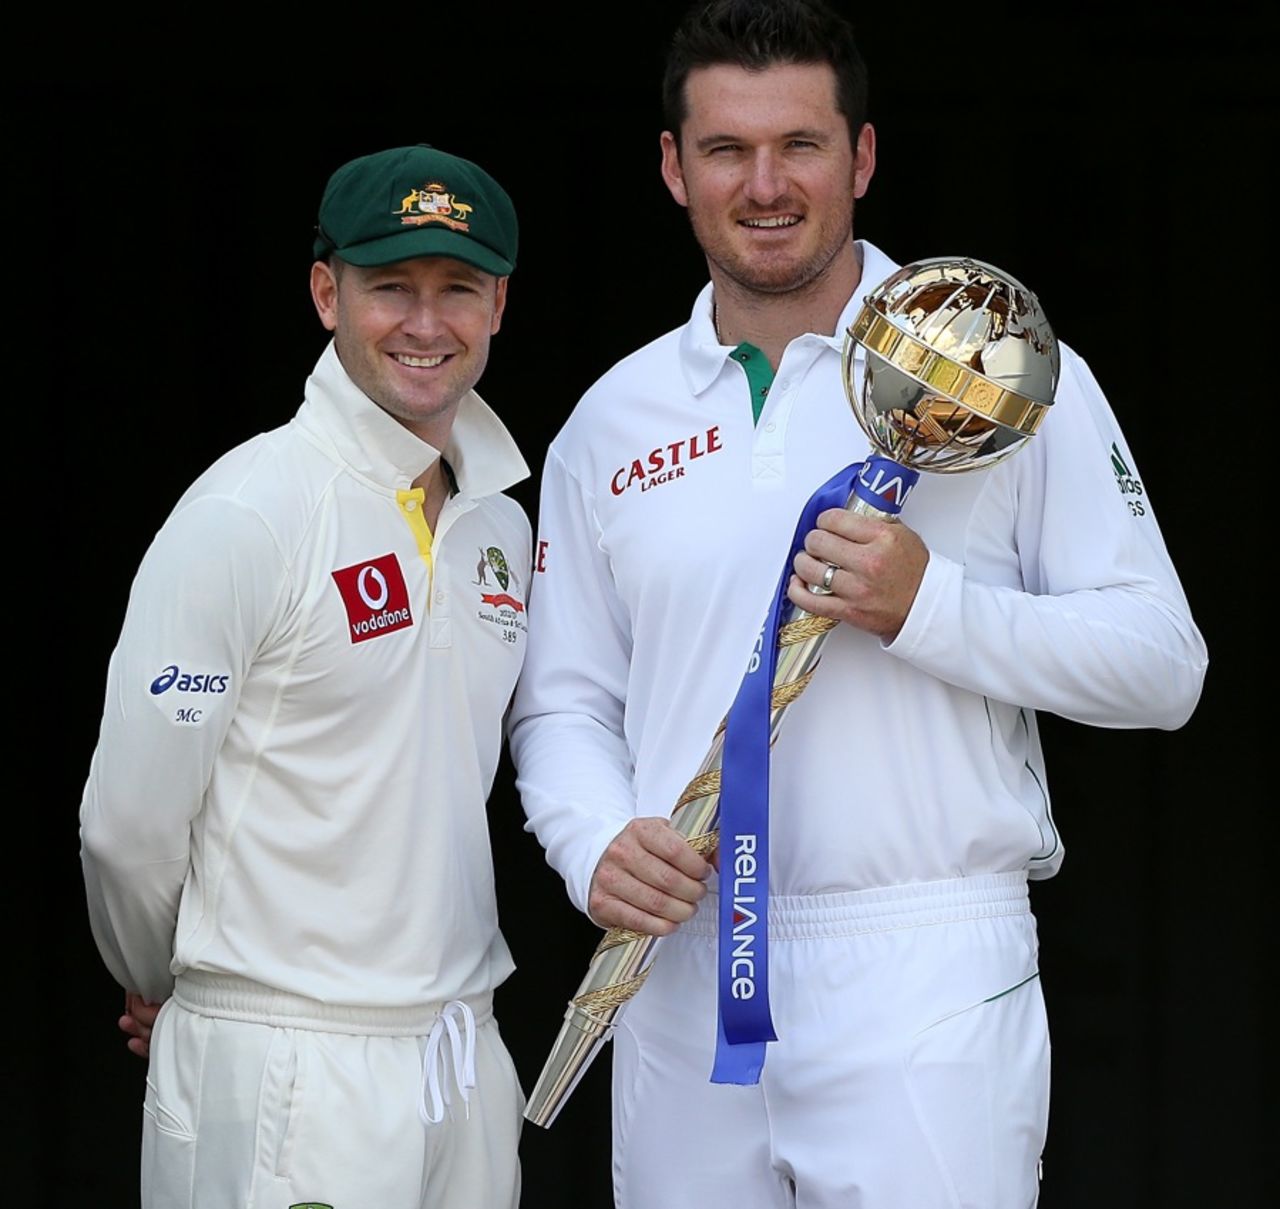 Michael Clarke and Graeme Smith with the ICC Test Championship mace, Brisbane, November 8, 2012